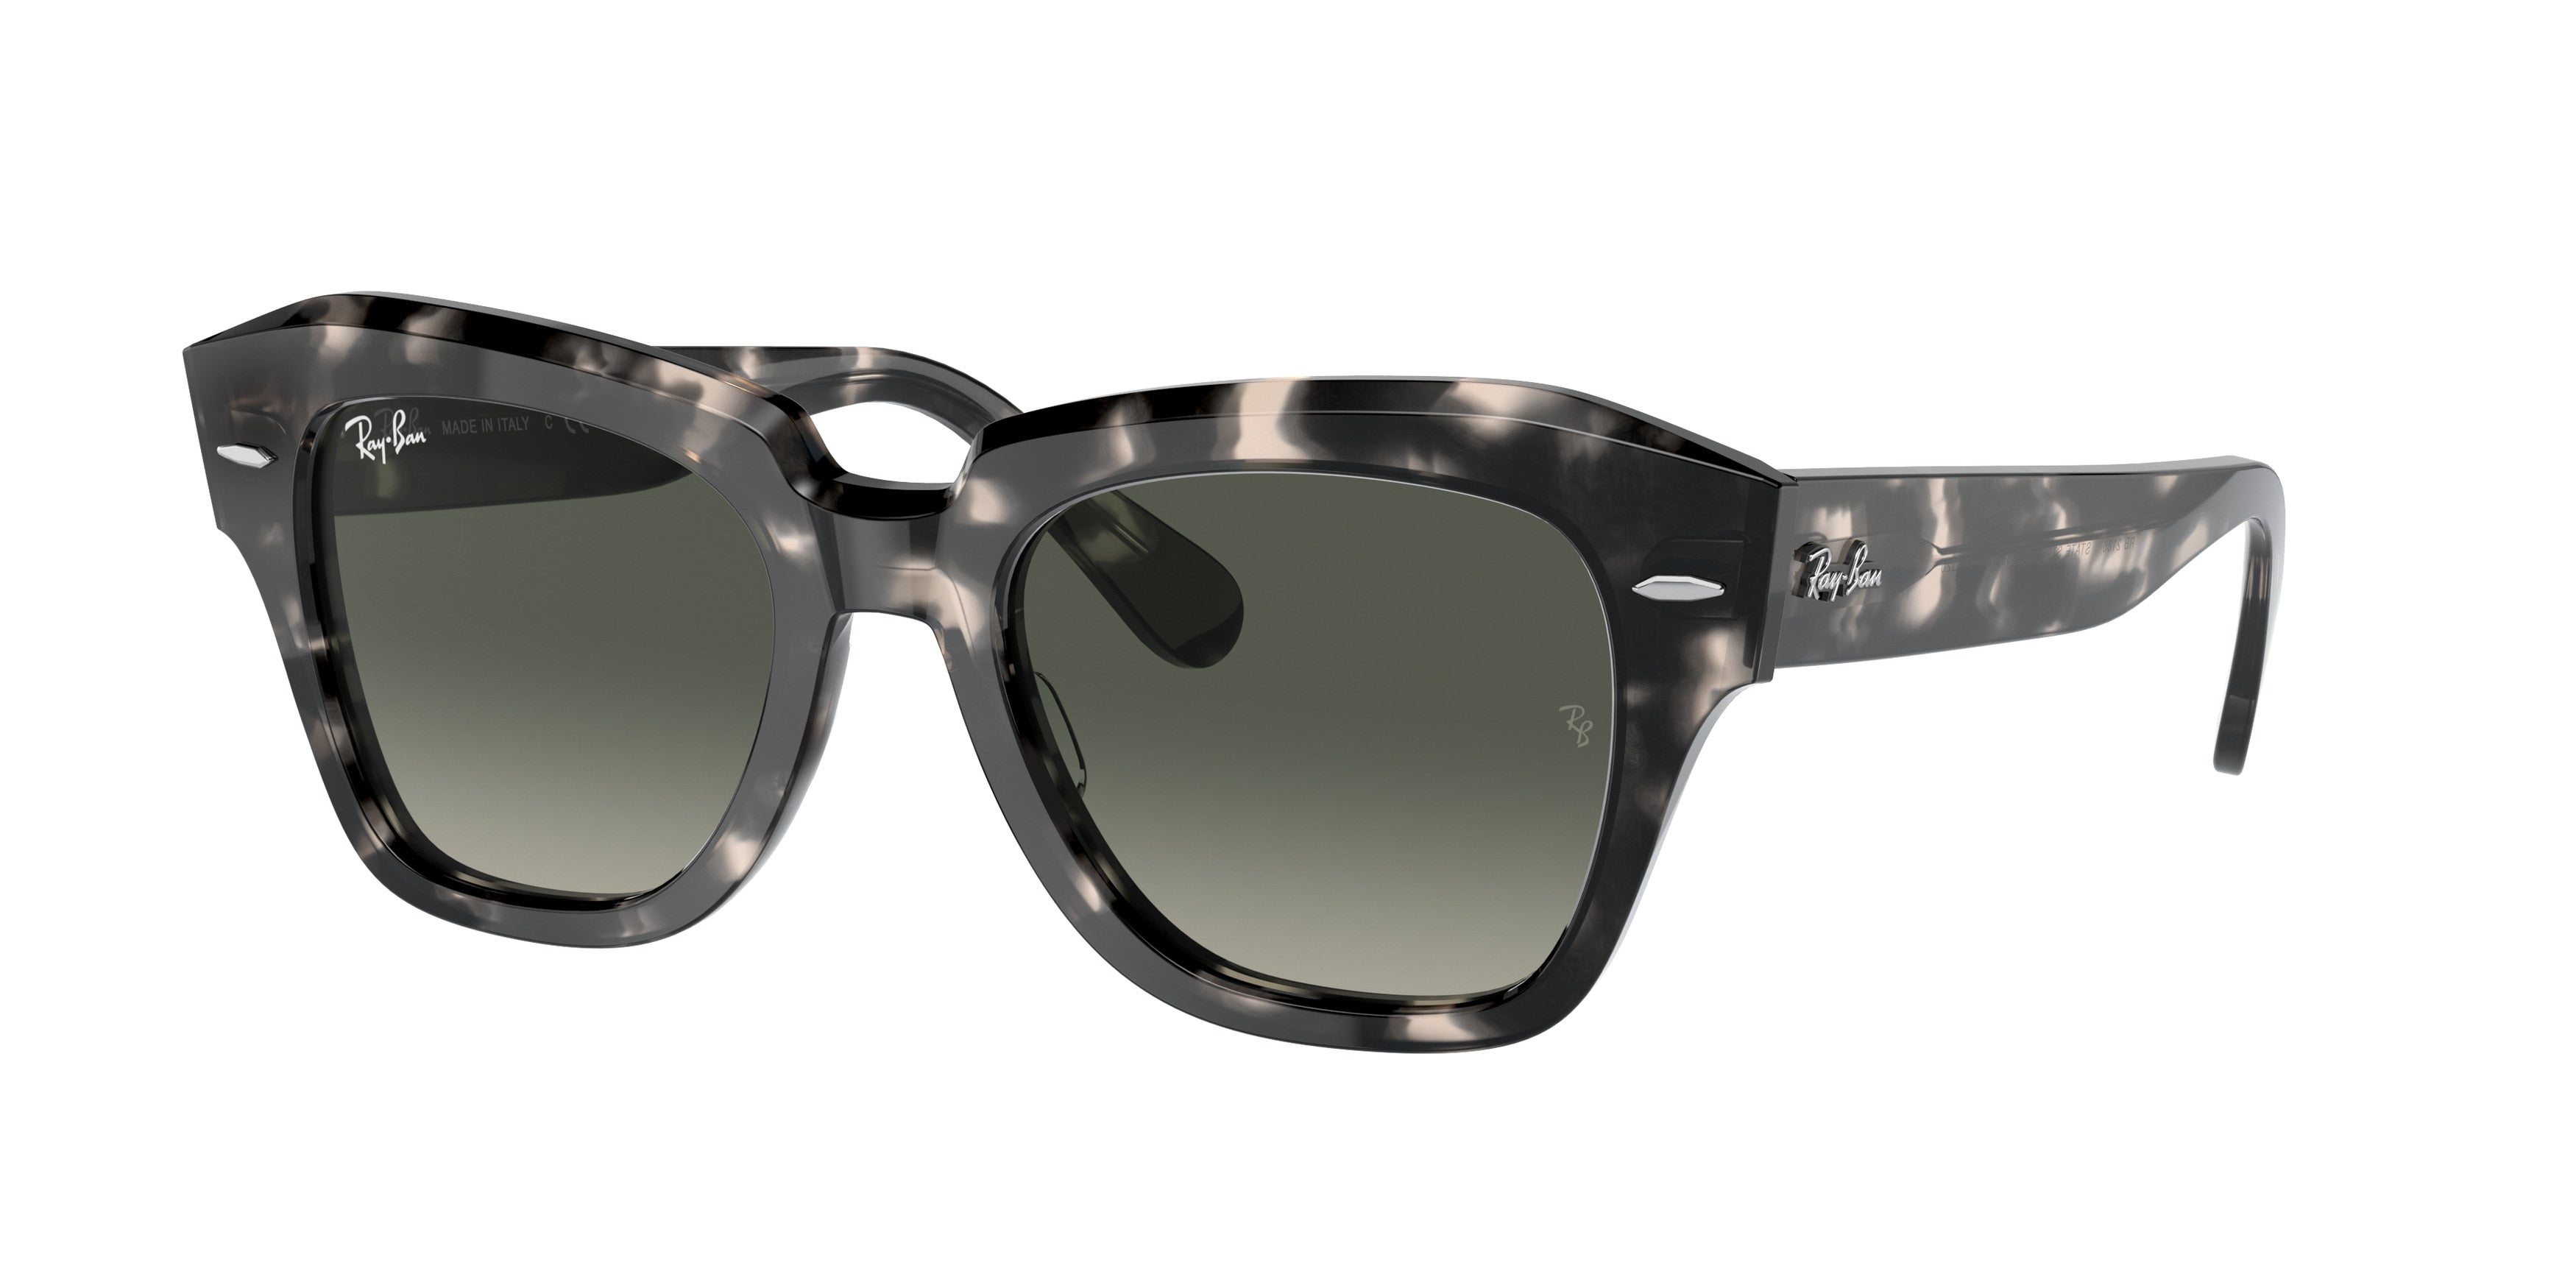 Ray-Ban STATE STREET RB2186 Square Sunglasses  133371-Grey Havana 52-145-20 - Color Map Grey